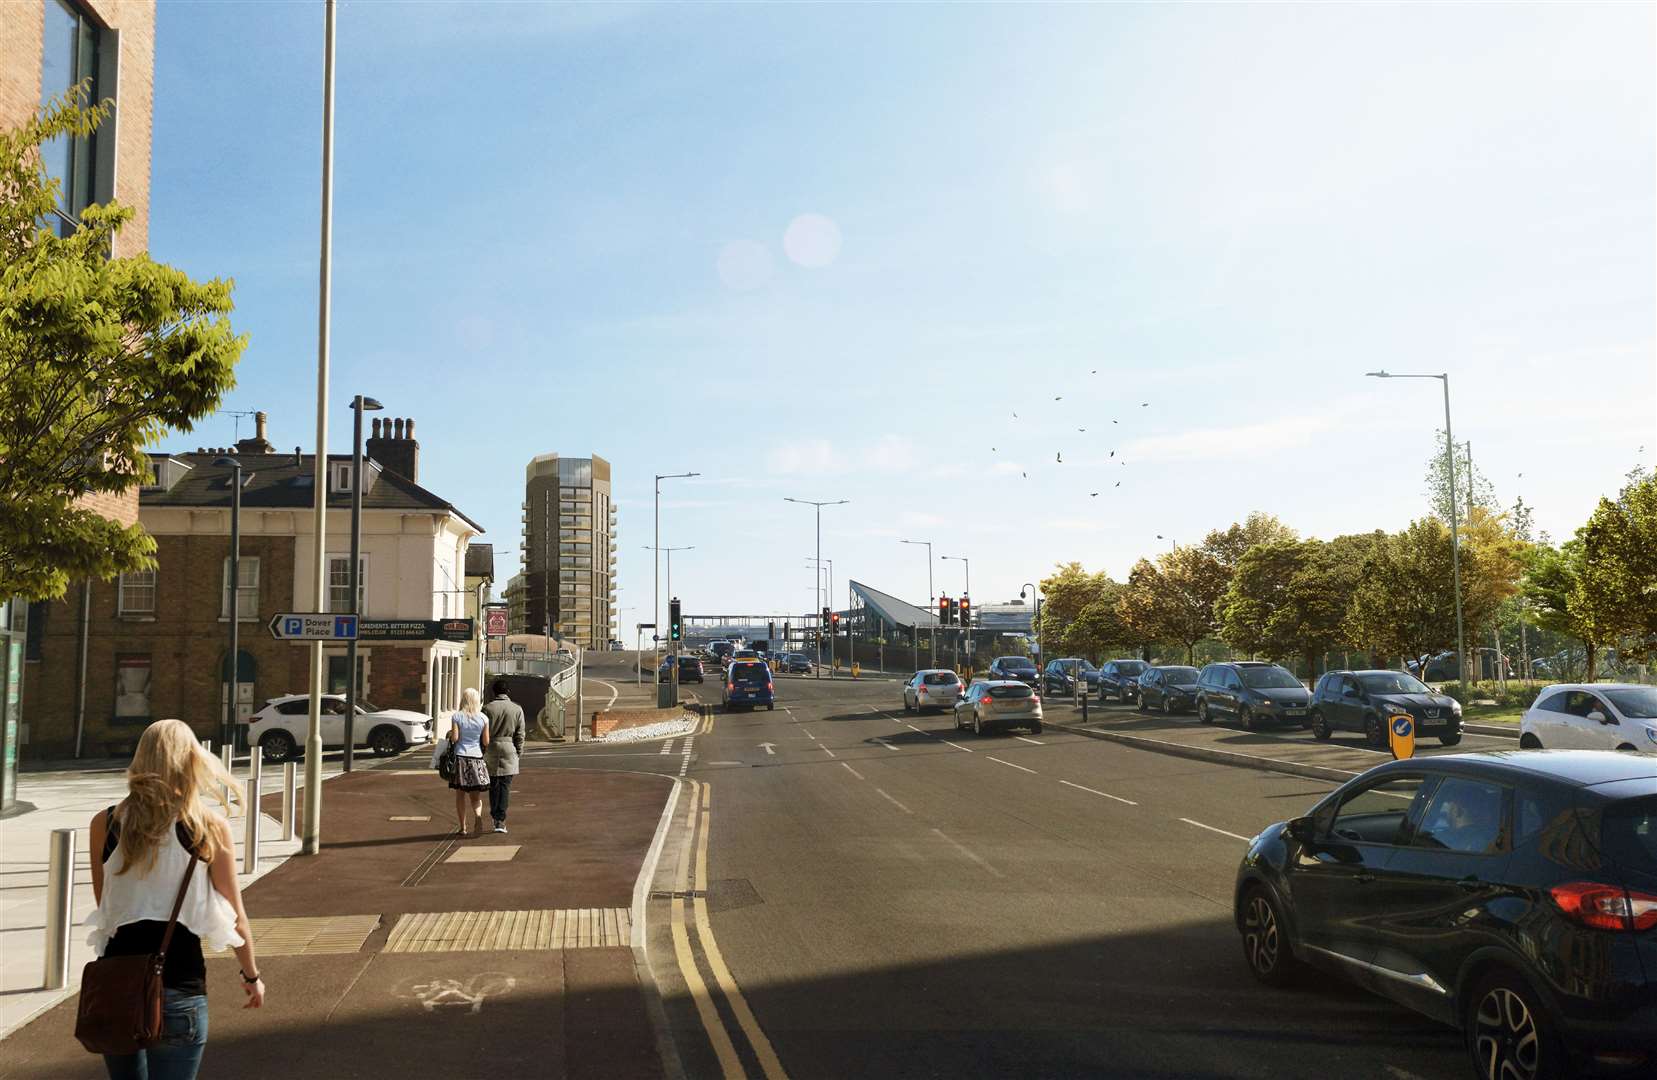 How the development could look from Station Road